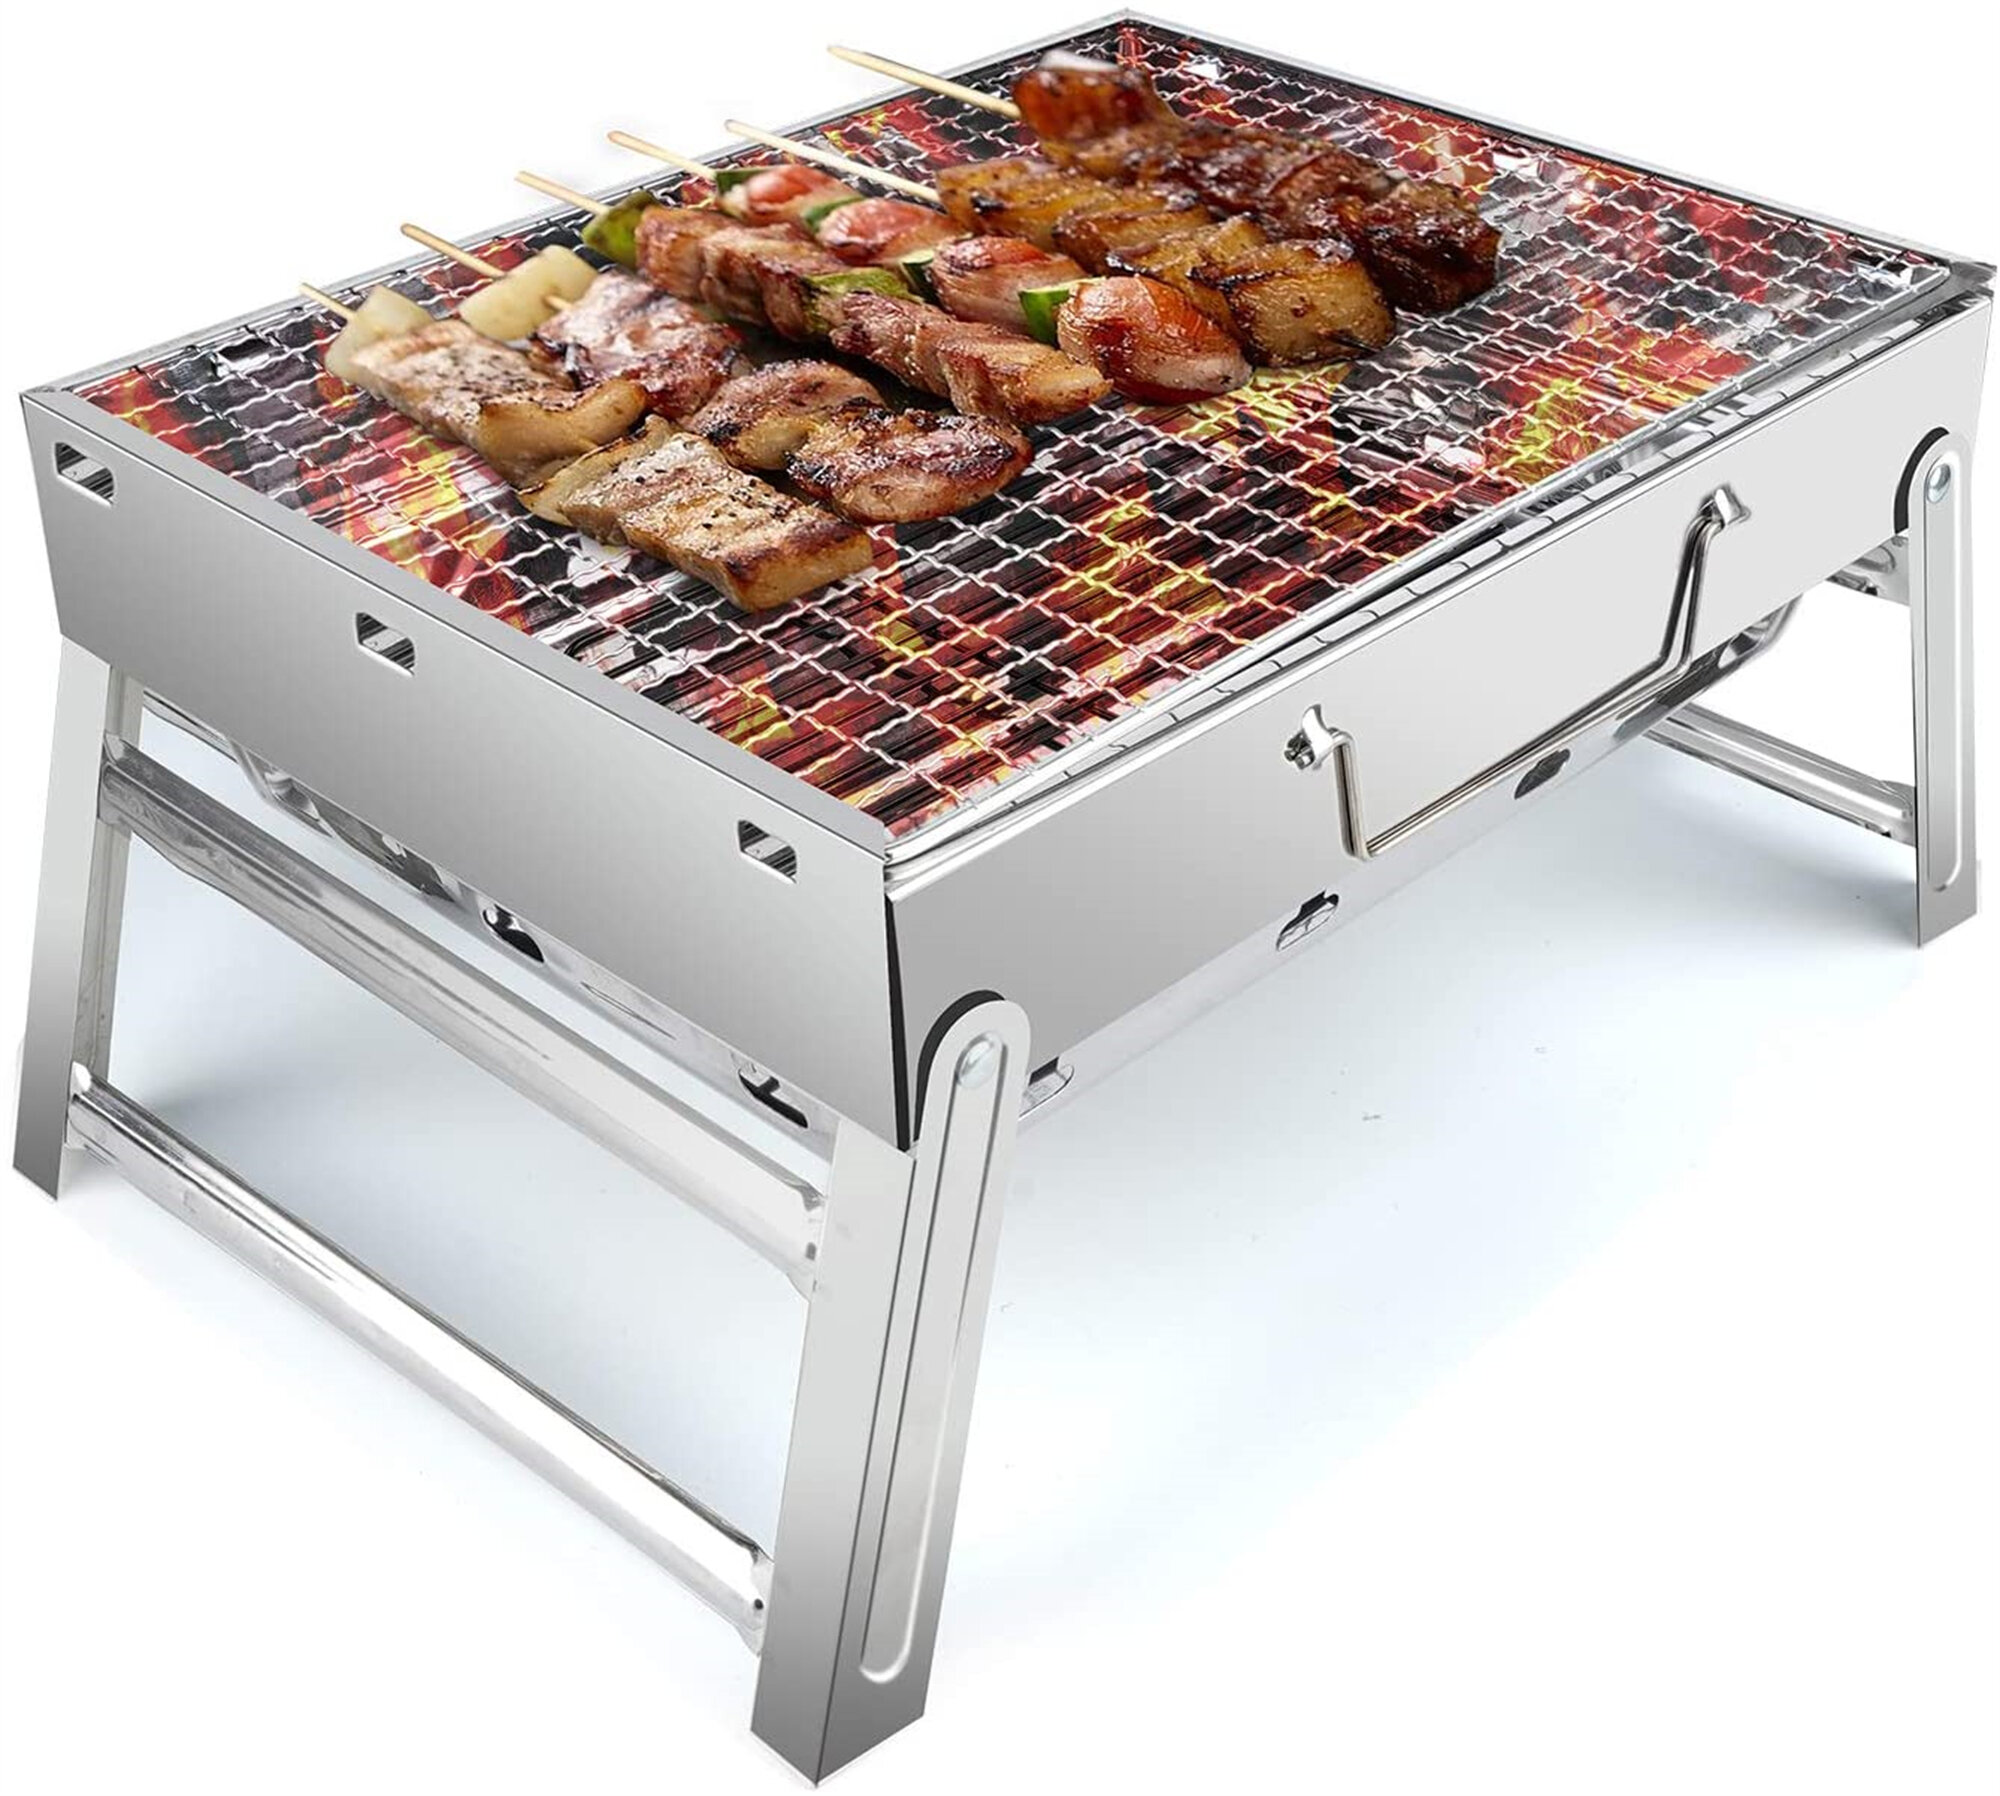 Portable Folding Charcoal Barbecue Desk Tabletop Outdoor NEW BBQ Barbecue Grill 